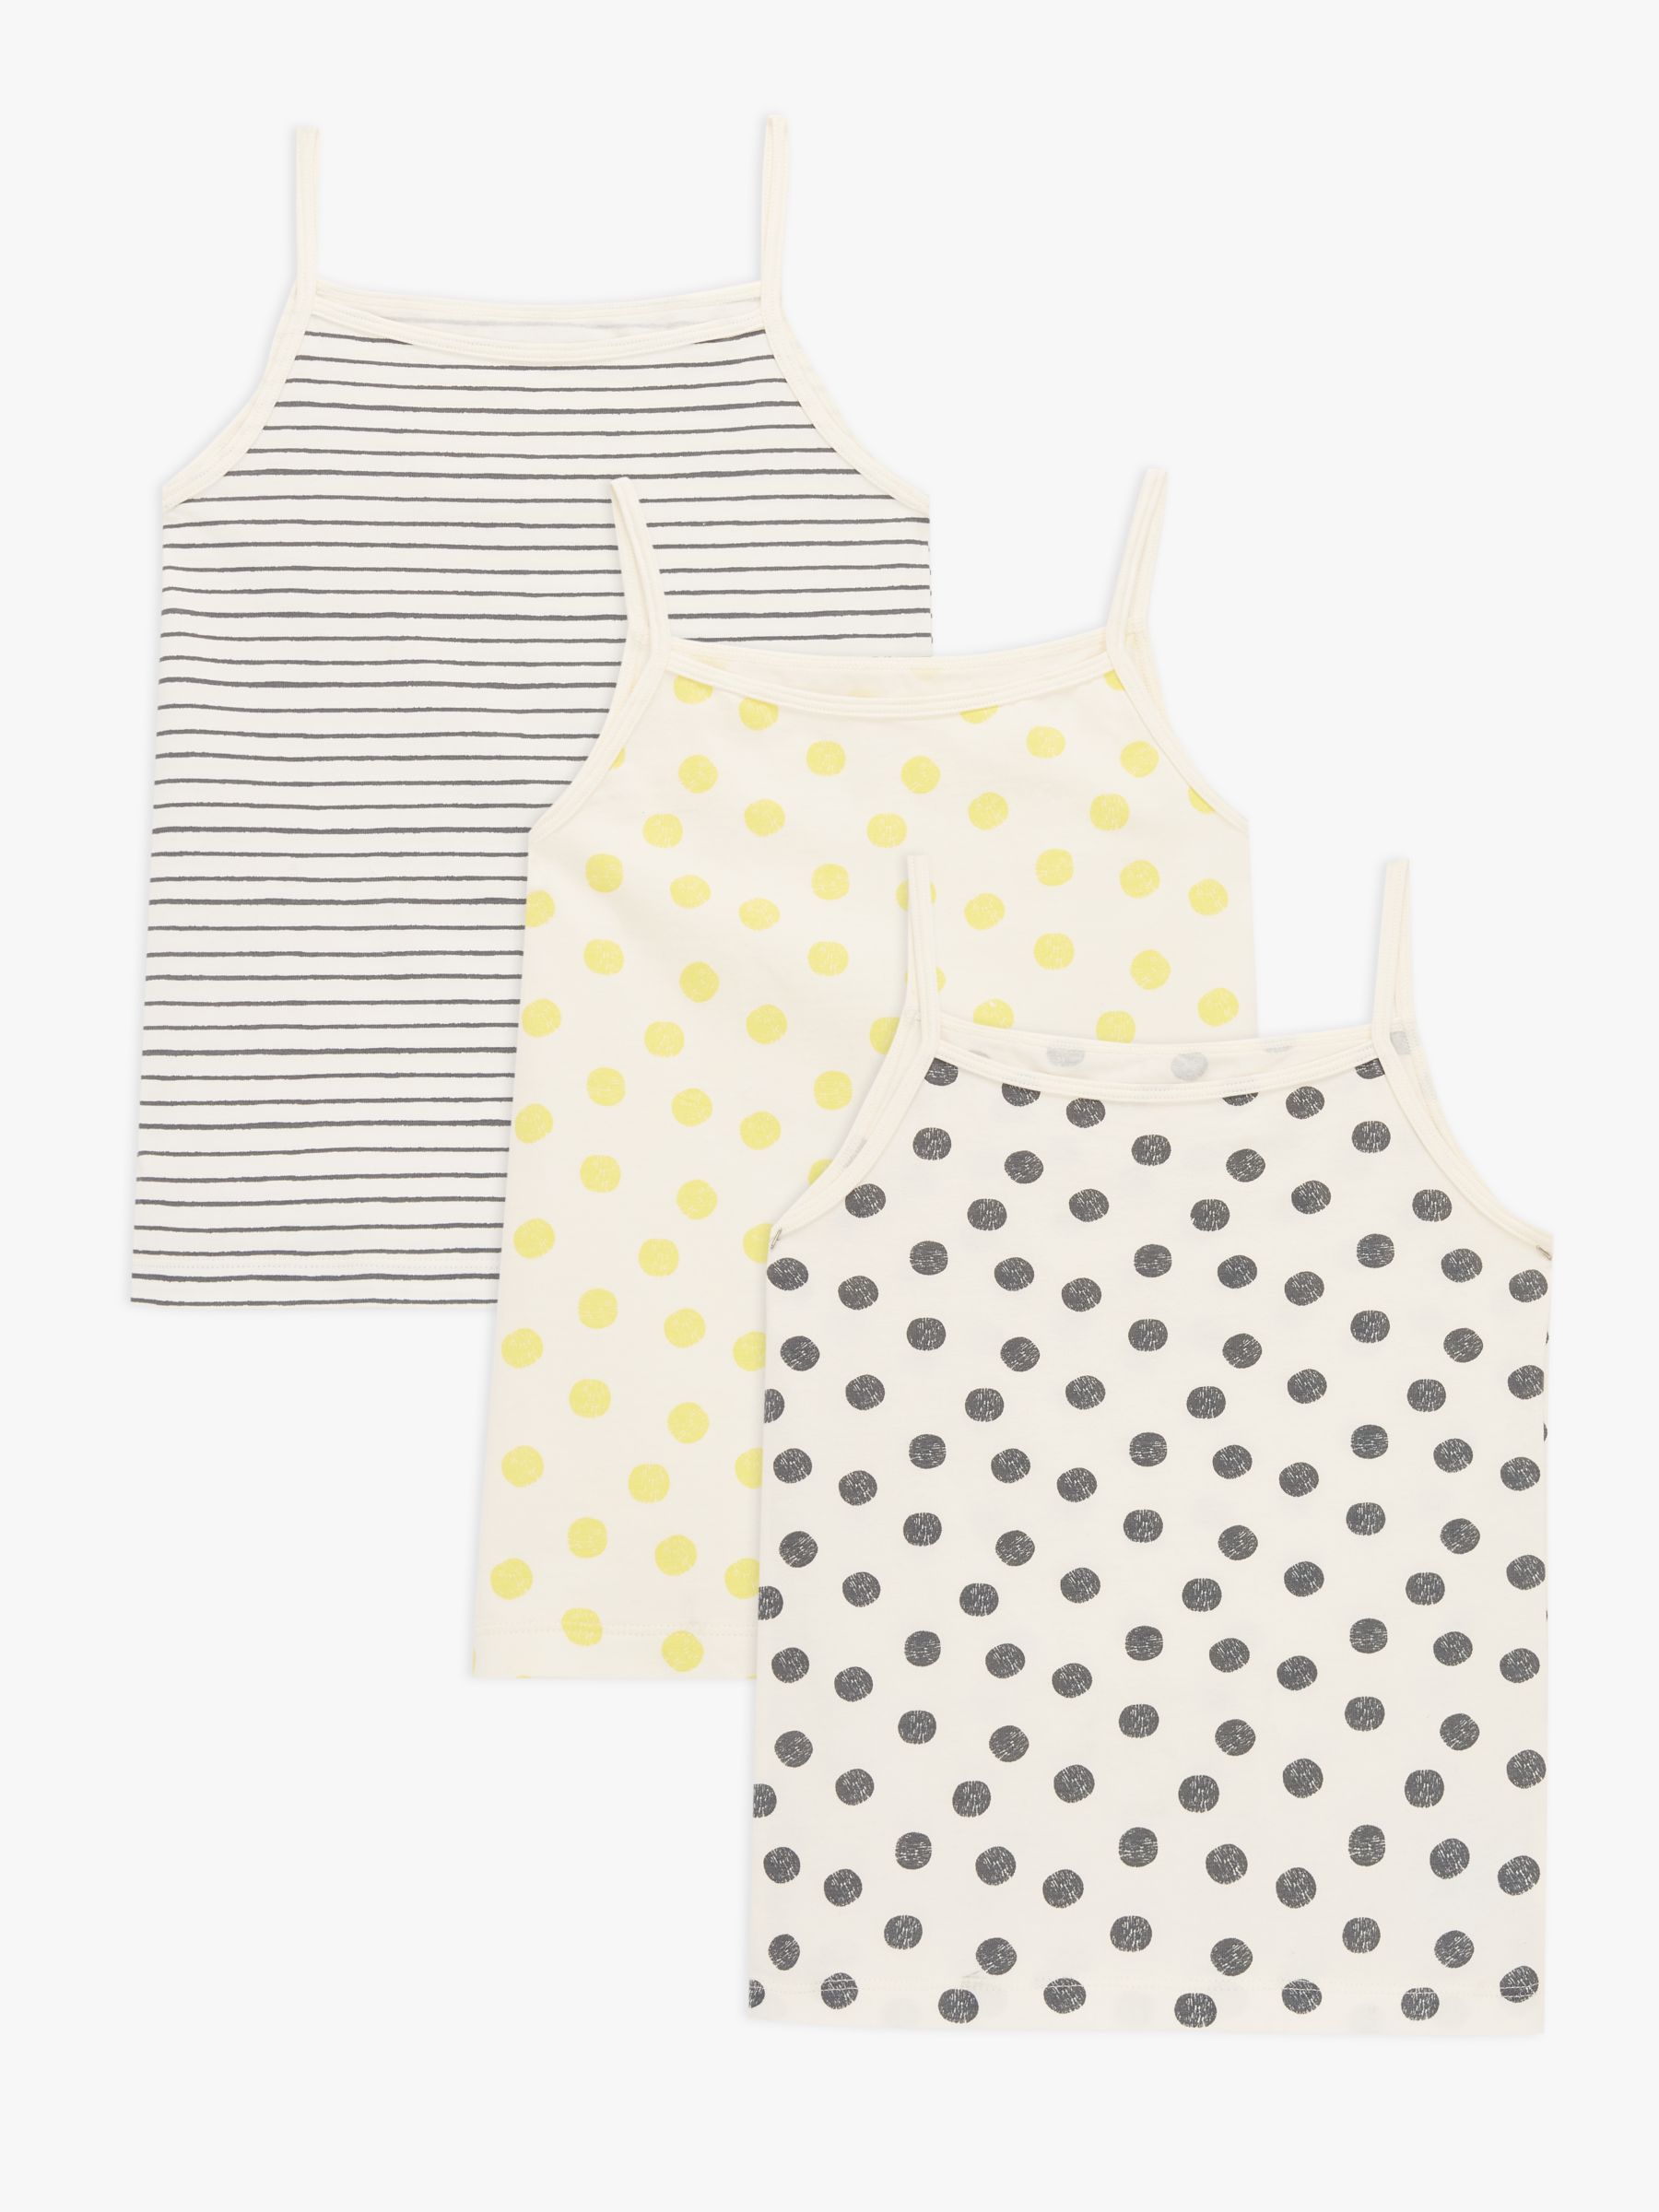 John Lewis ANYDAY Kids' Stripe & Spot Camisole Vests, Pack of 3, Multi